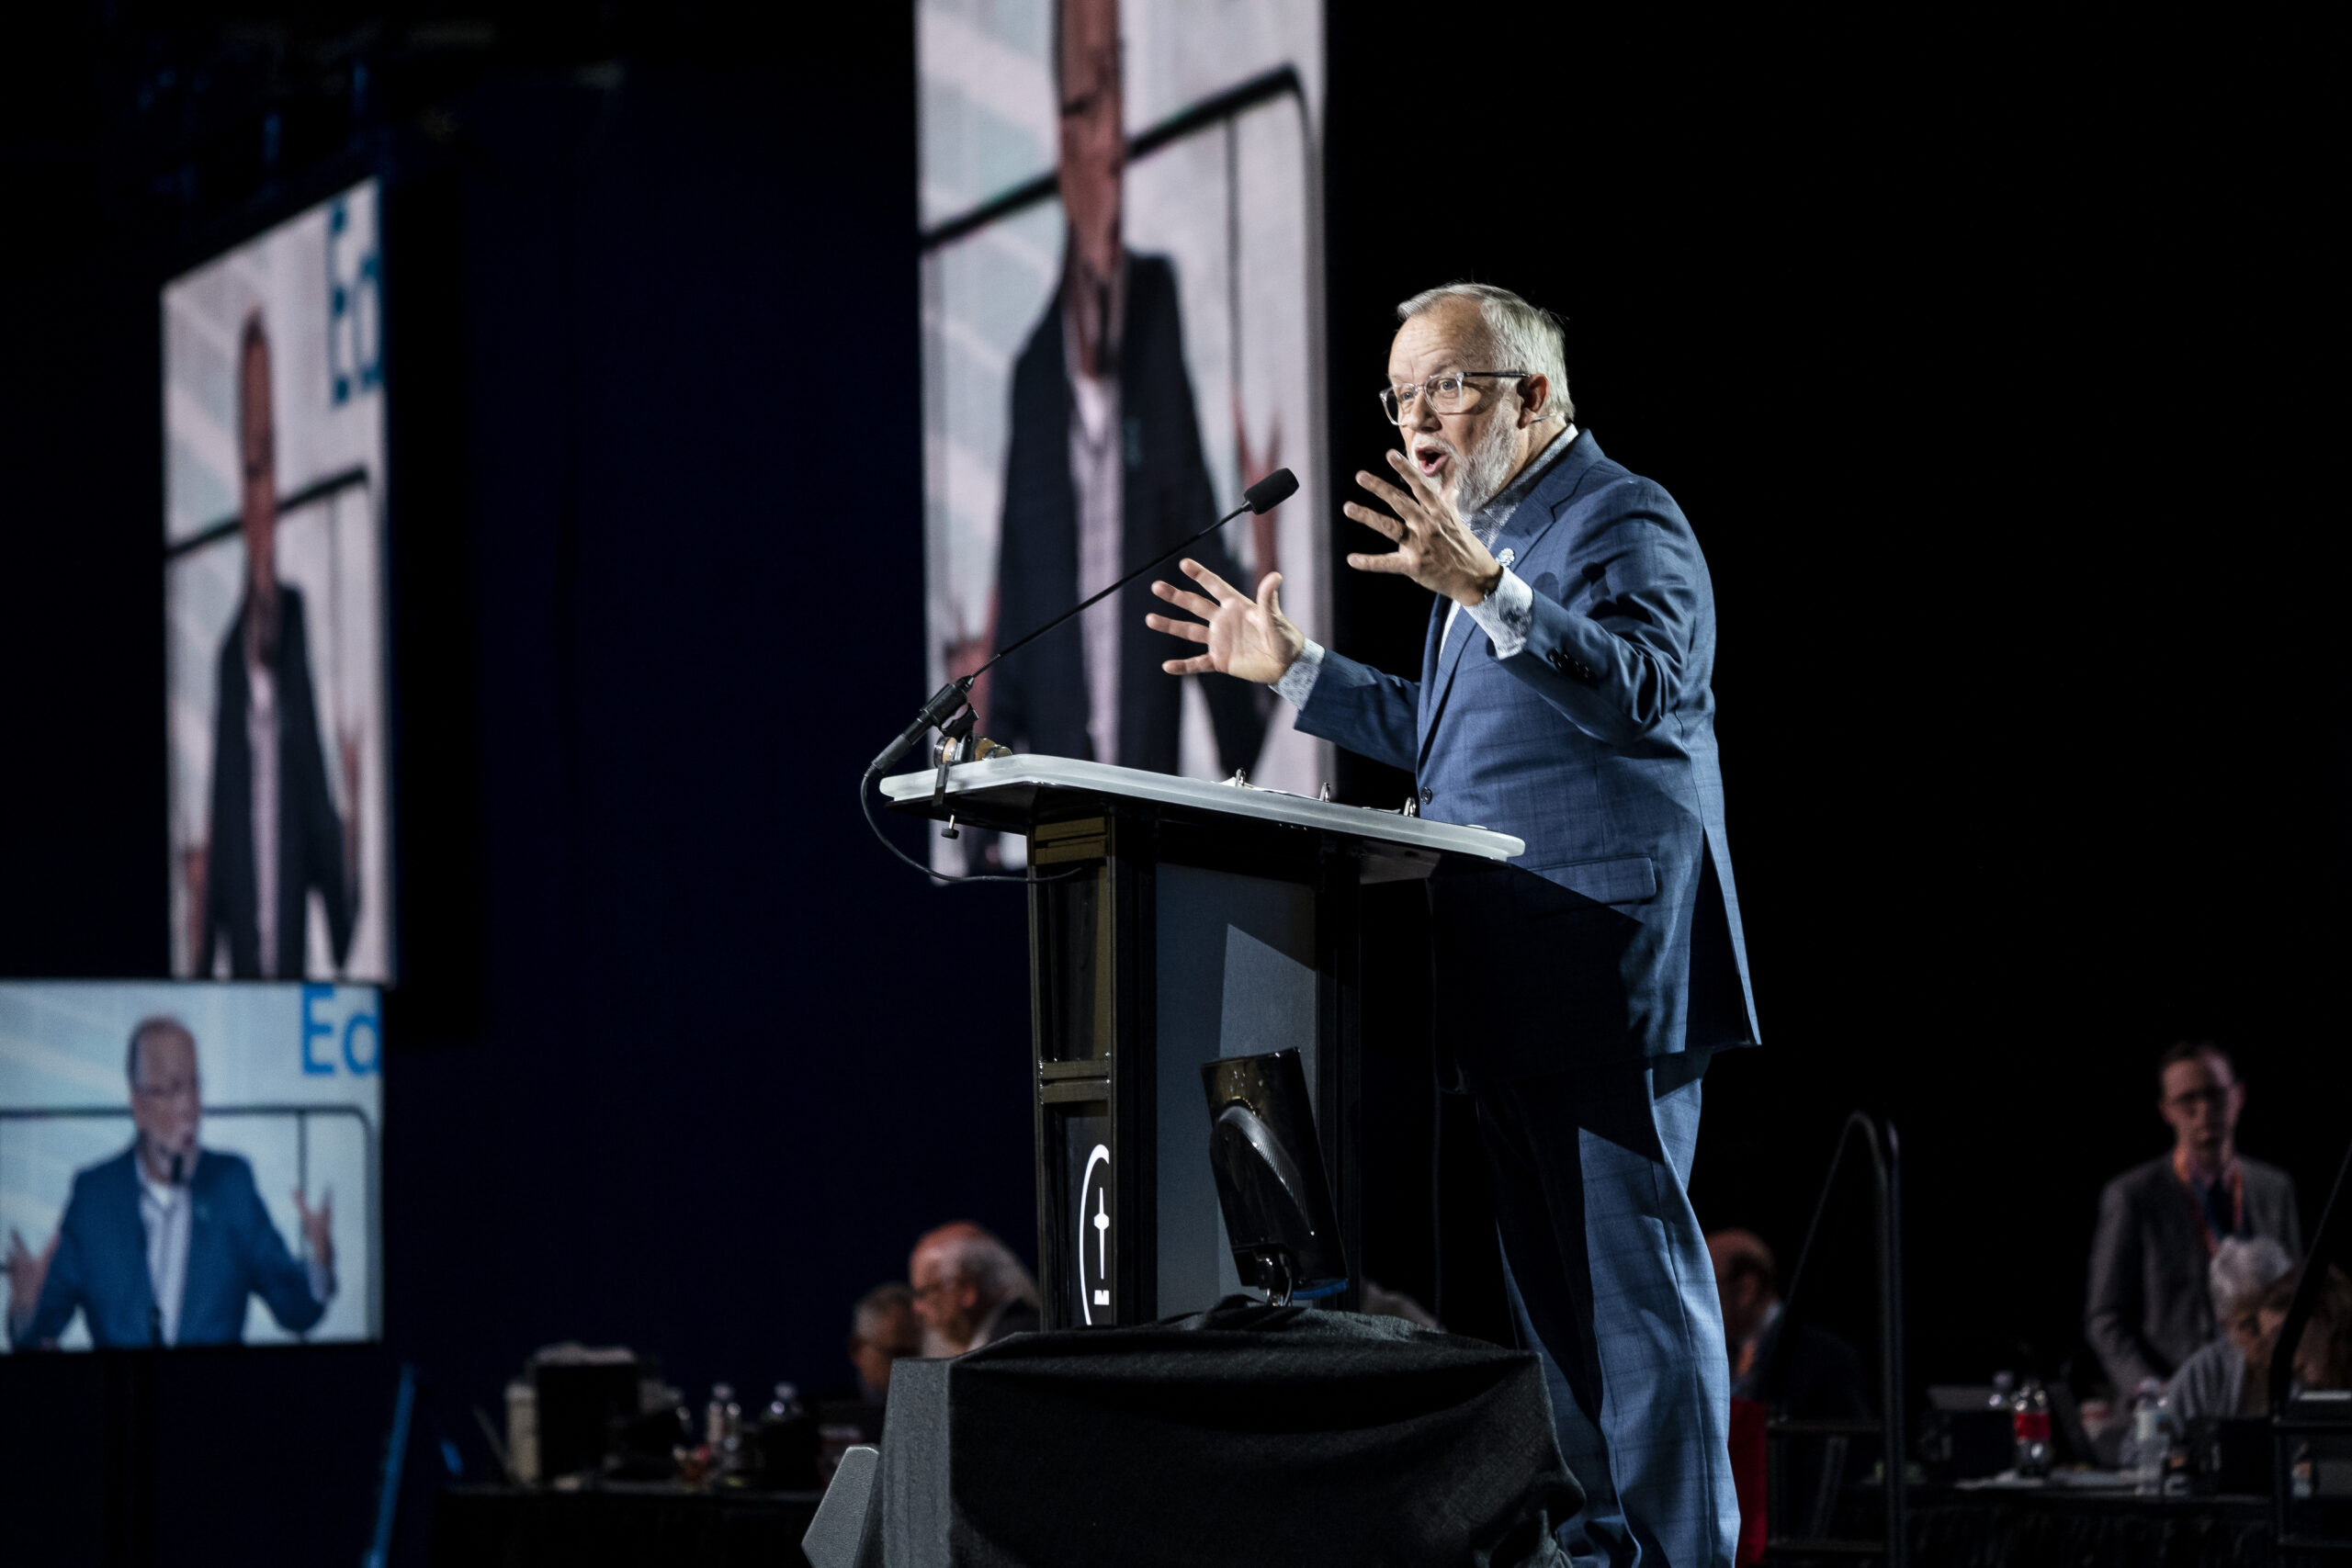 Ed Litton, SBC president, speaks during the Southern Baptist Convention held at the Anaheim Convention Center in Anaheim, California, on Tuesday, June 14, 2022. Photo by Justin L. Stewart/Religion News Service